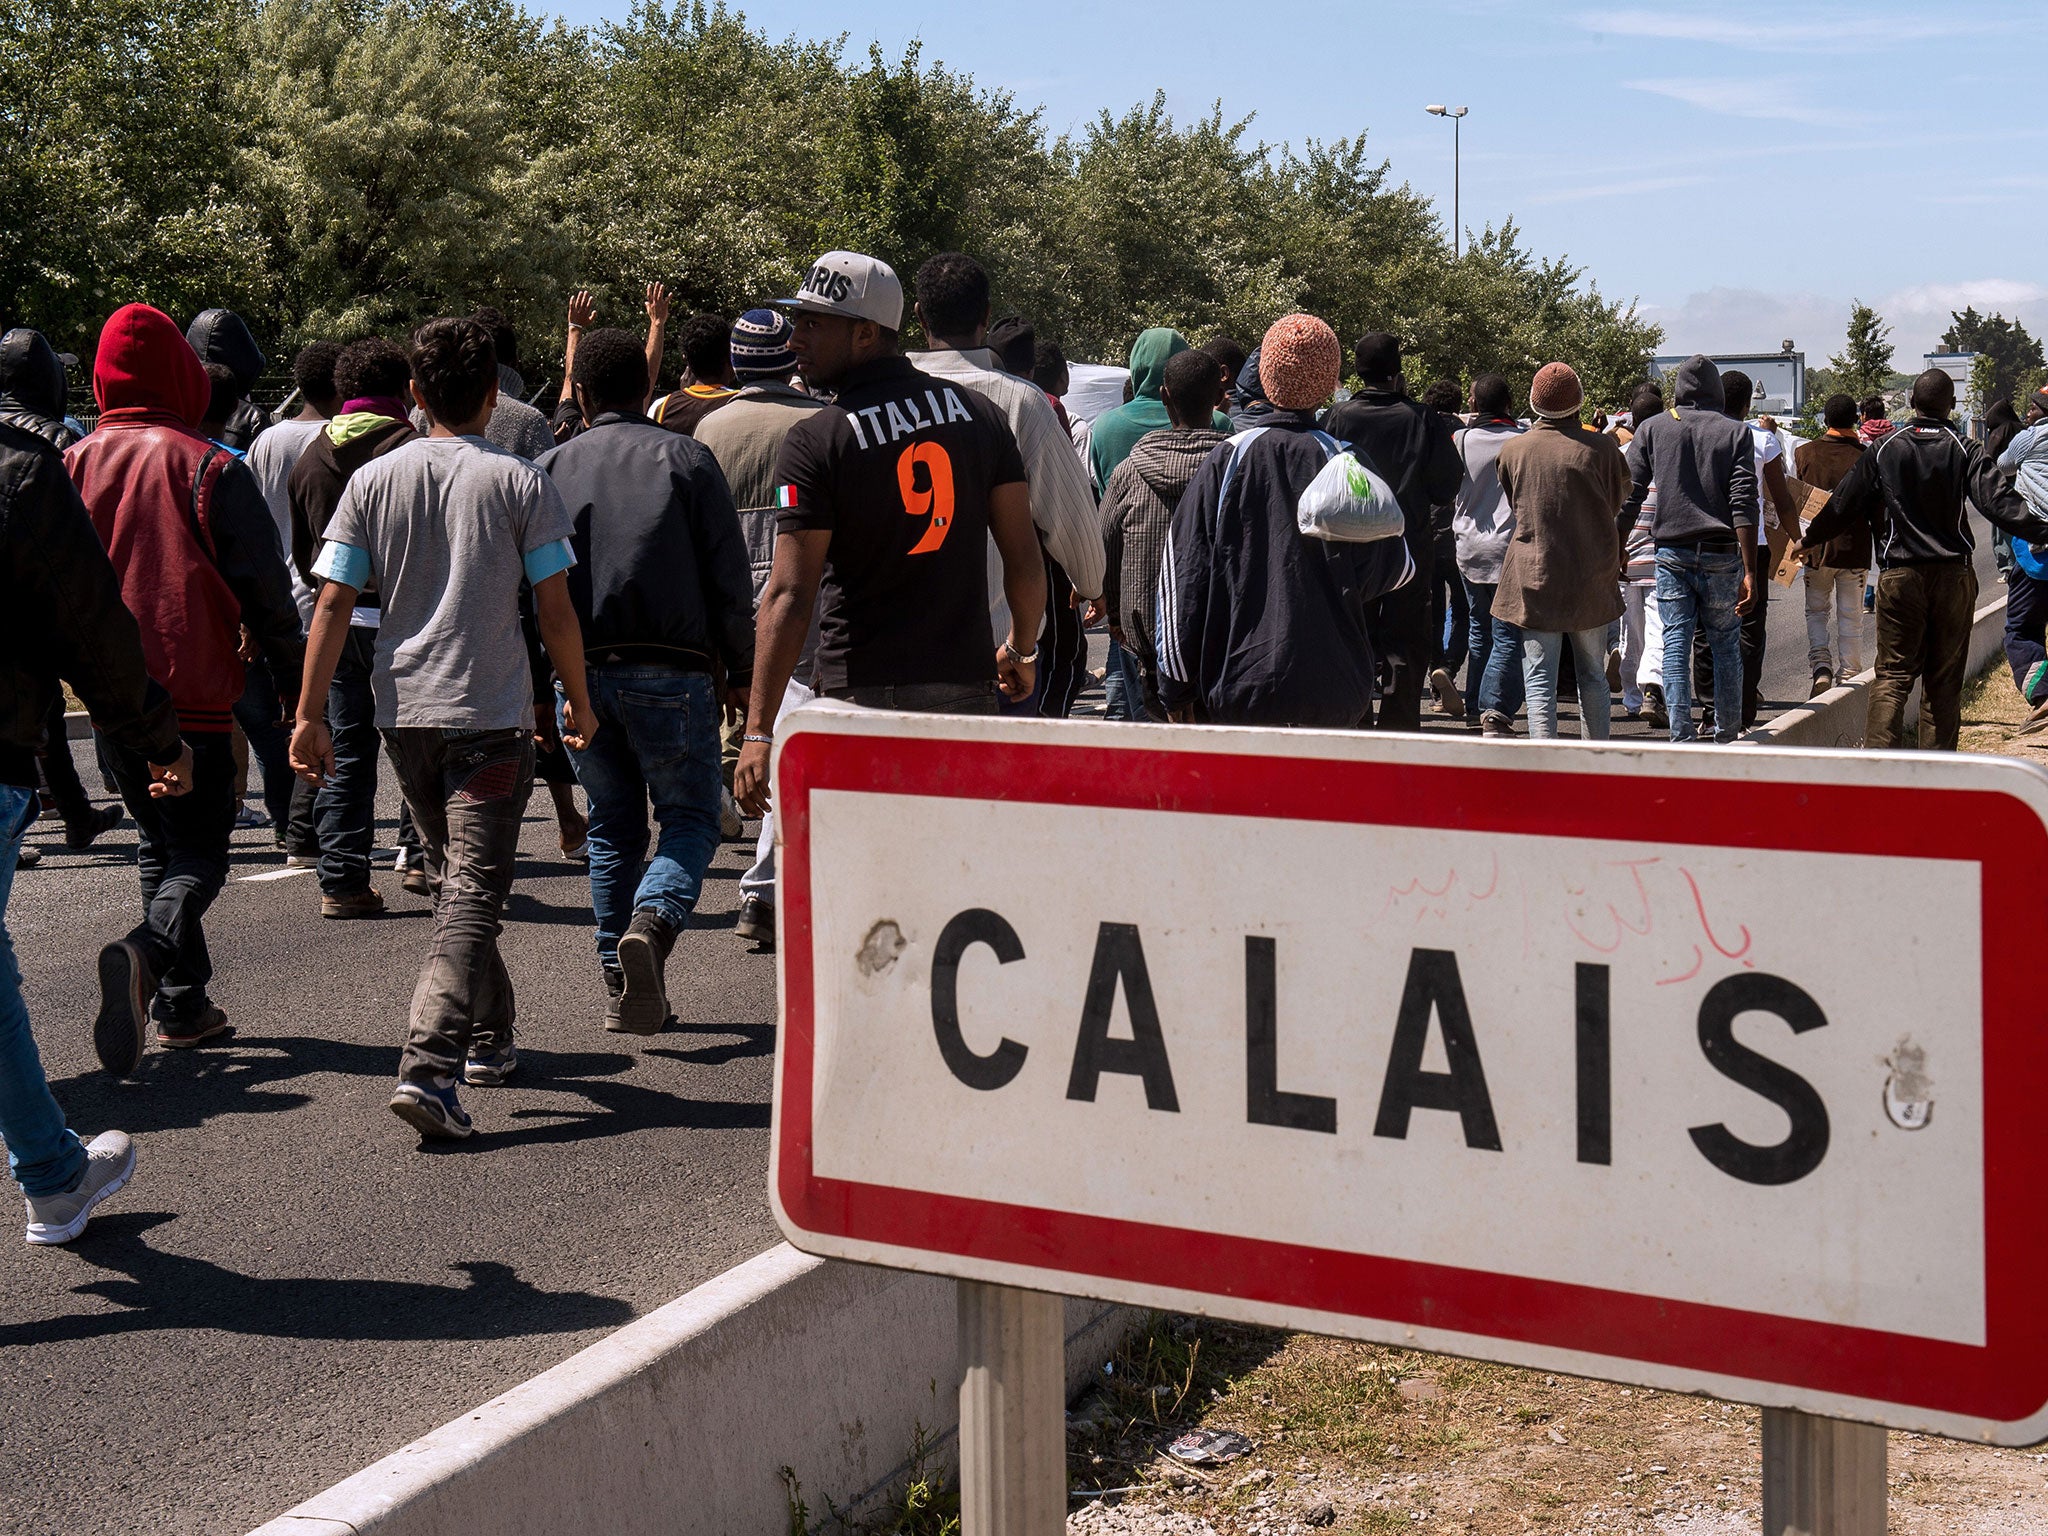 The move prompted claims more refugees would reach Calais and attempt to enter Britain